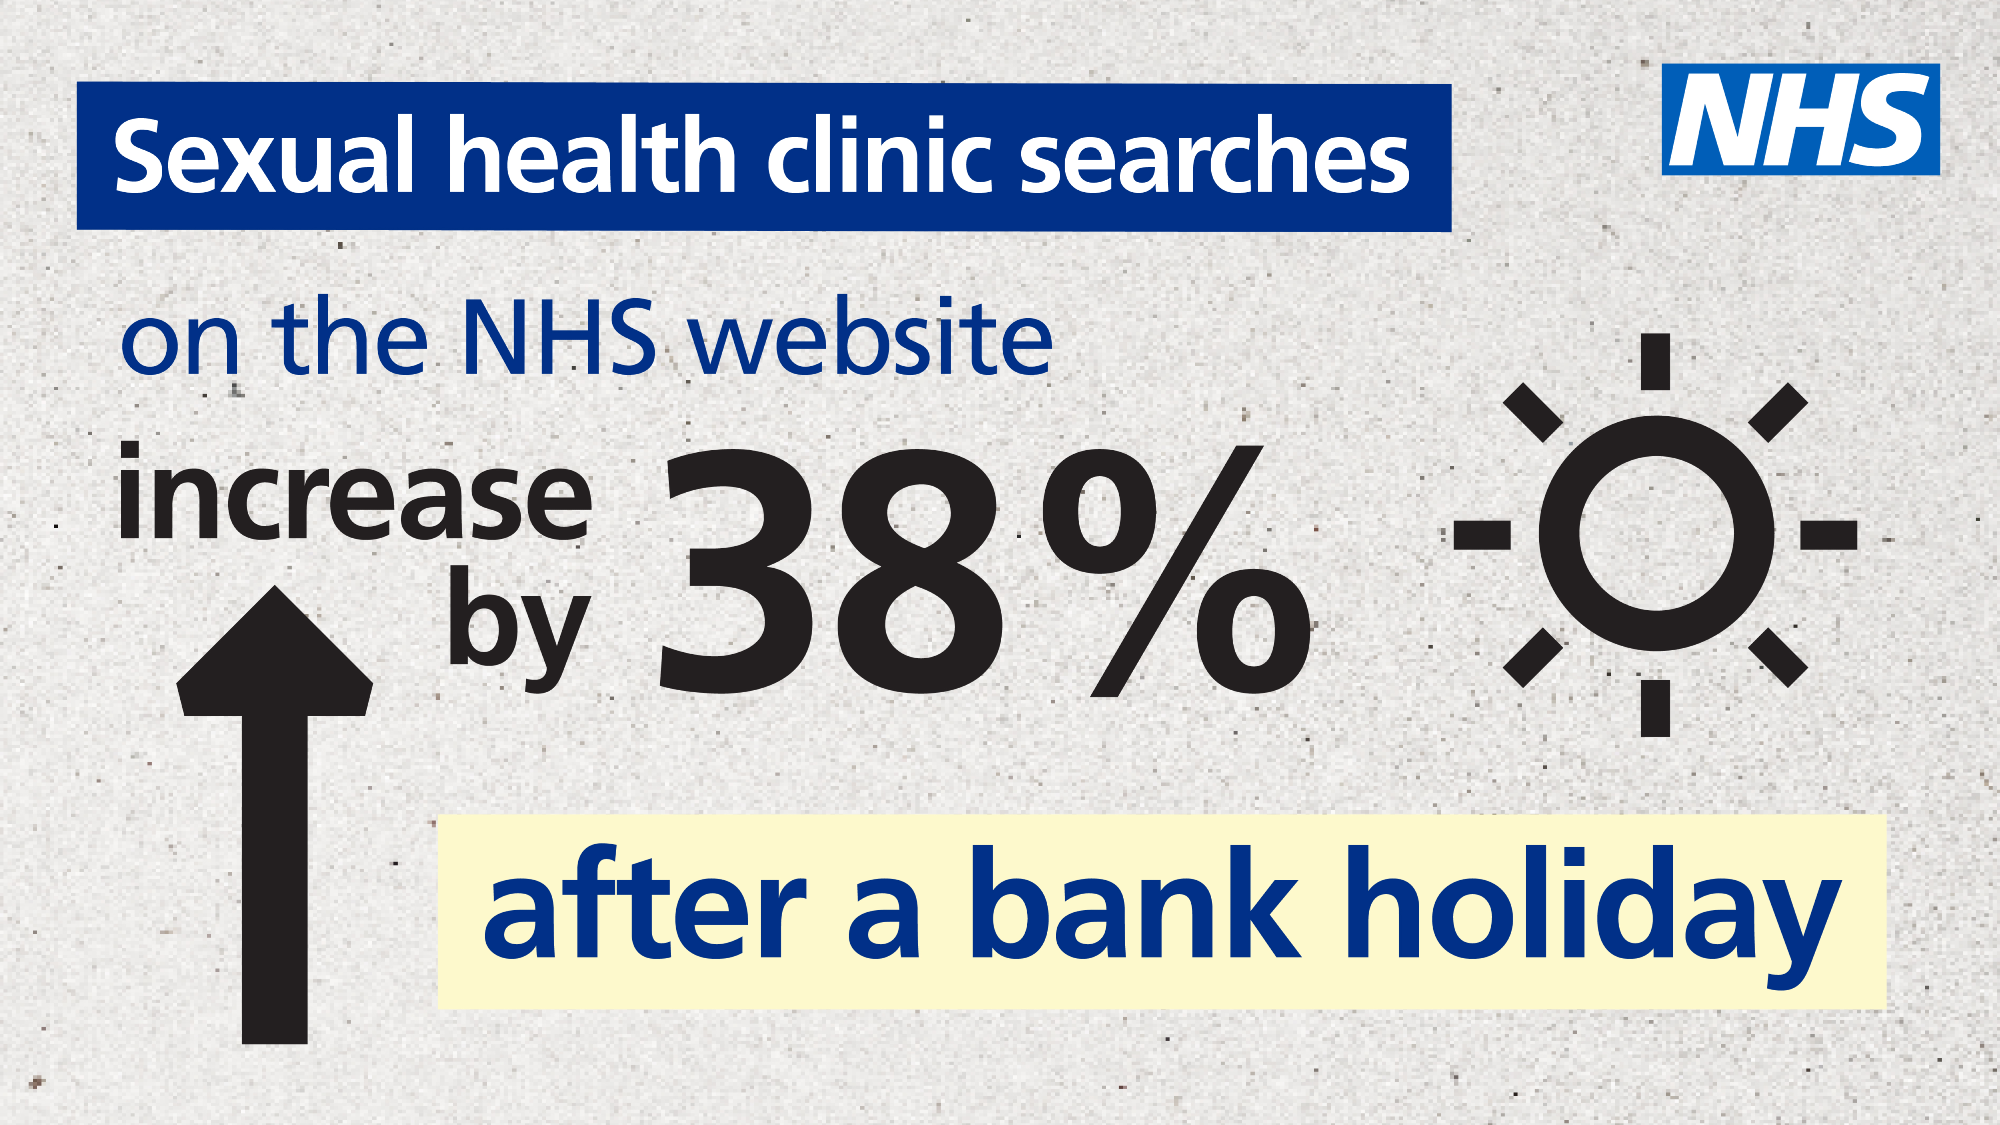 Sexual health clinic searches on the NHS website increase by 38% following a bank holiday